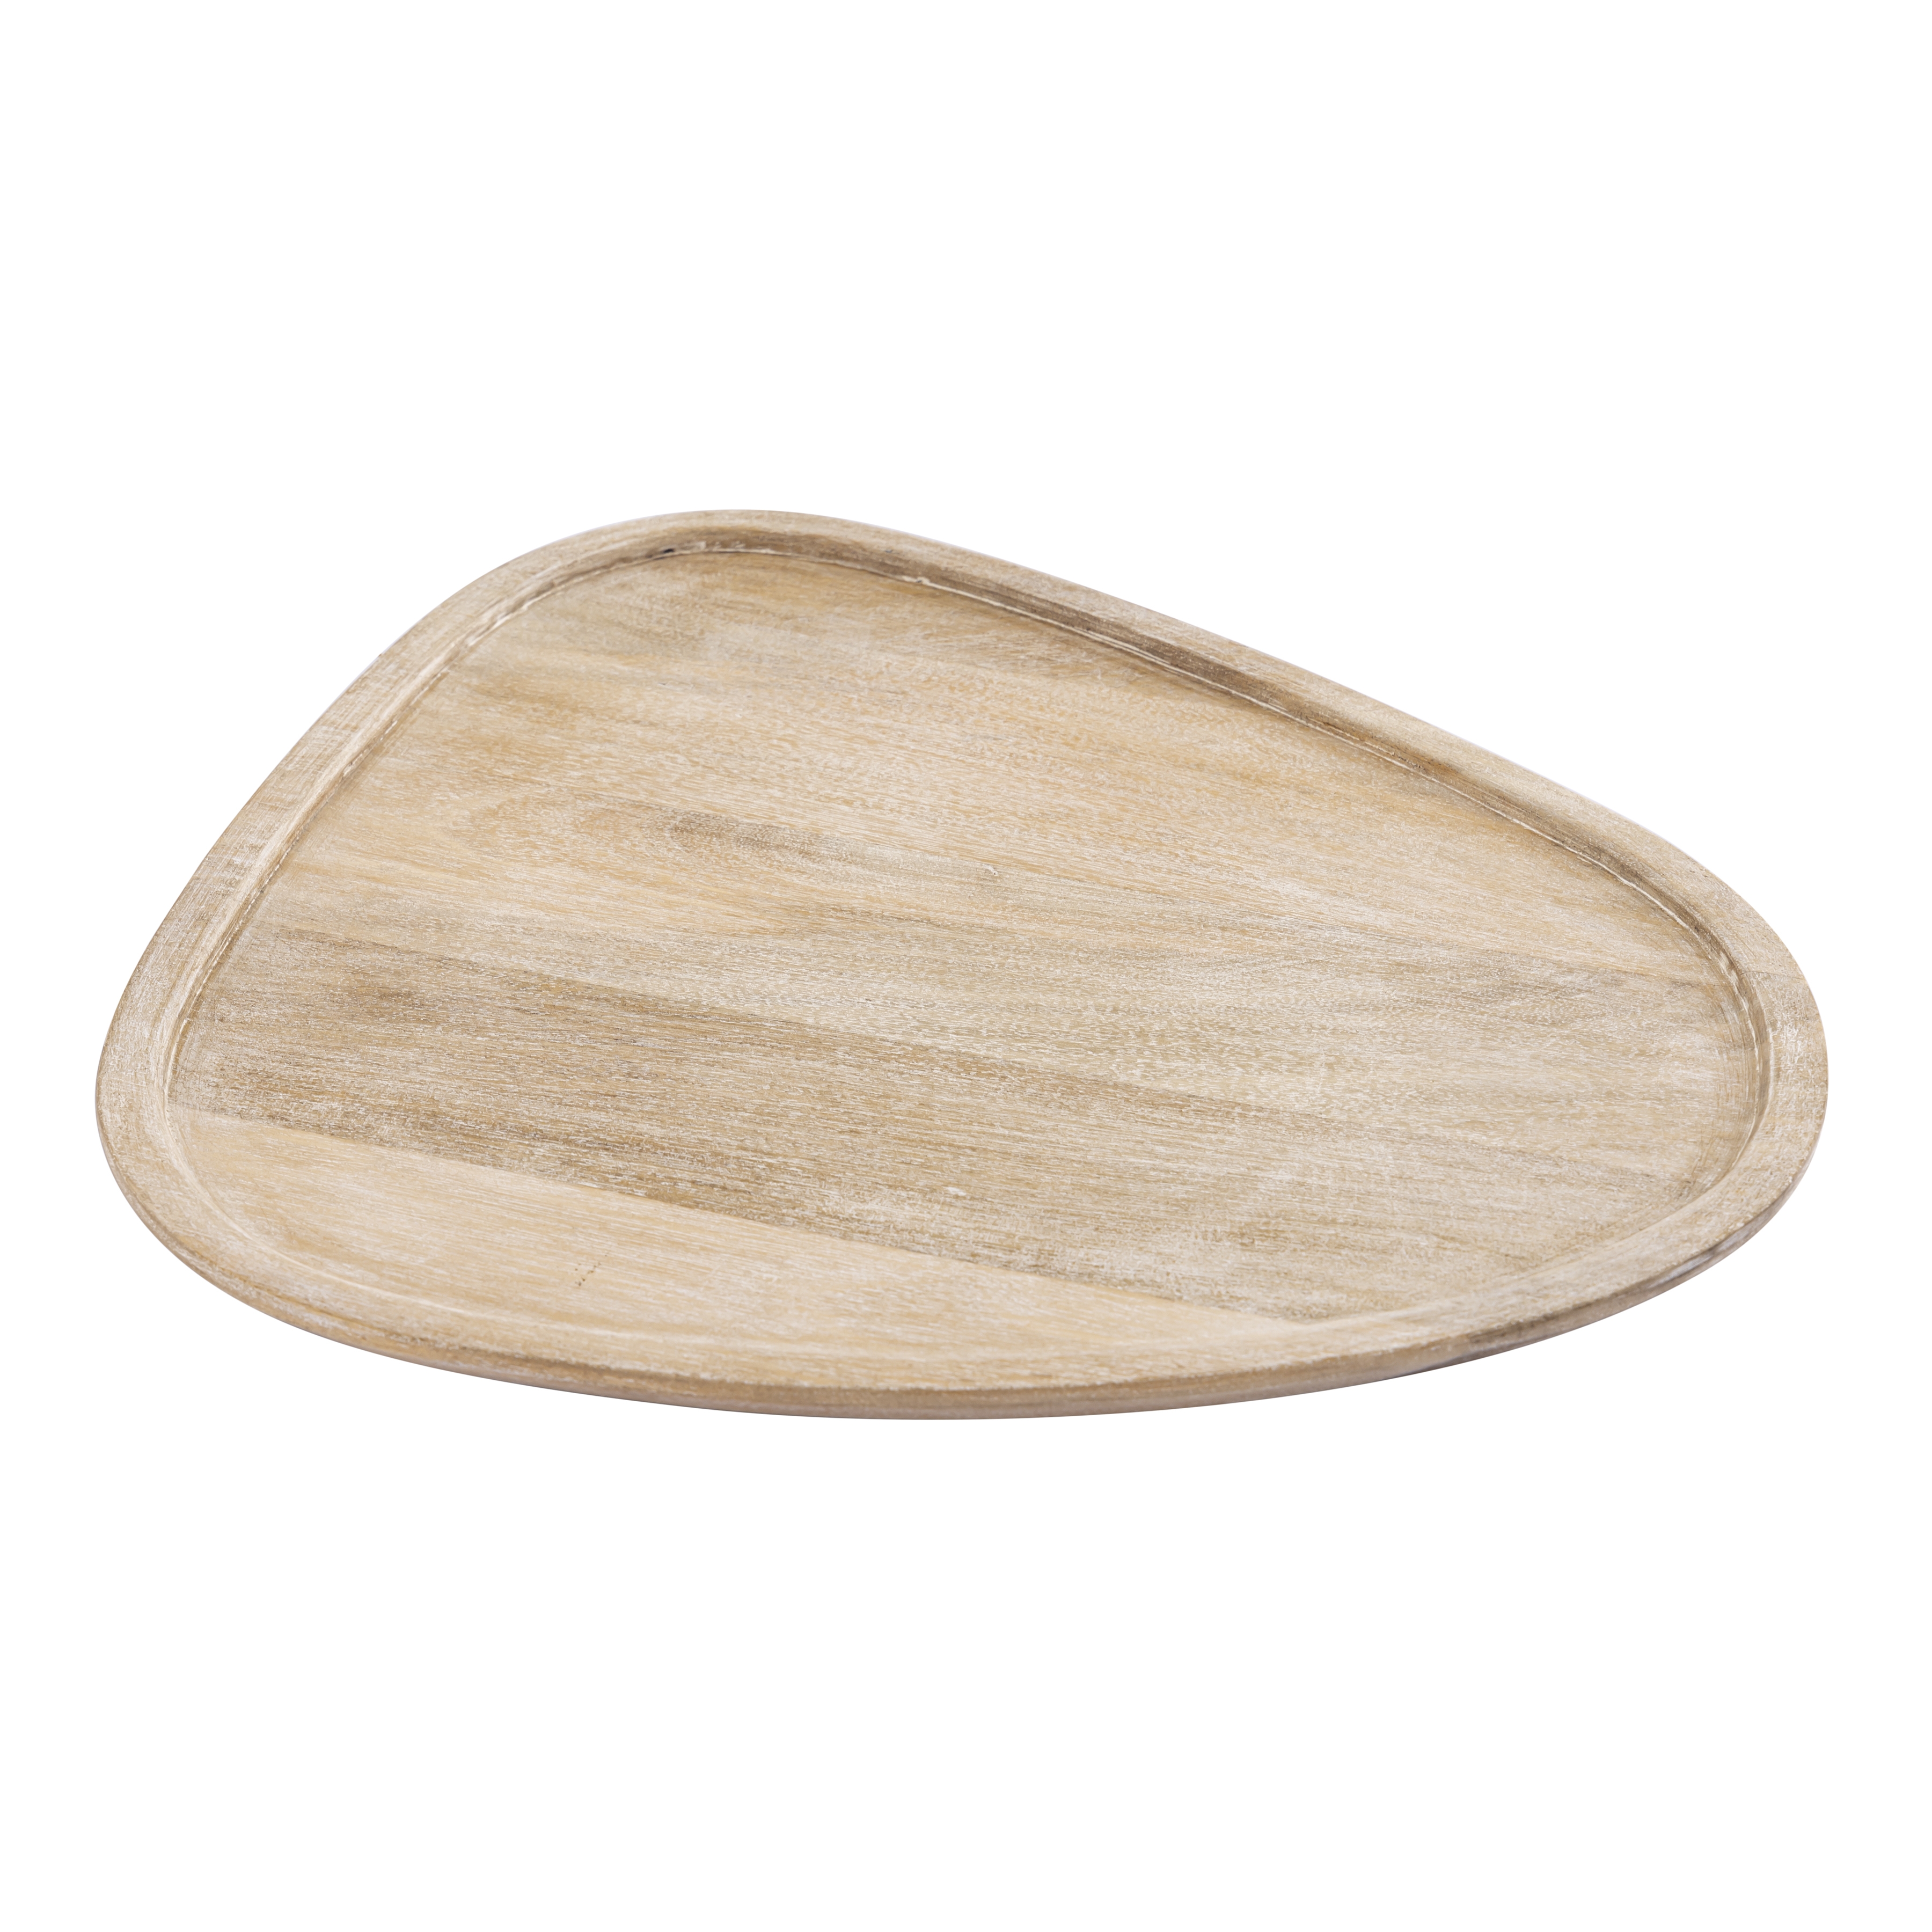 Morris Cerused Tray - Natural - Image 3